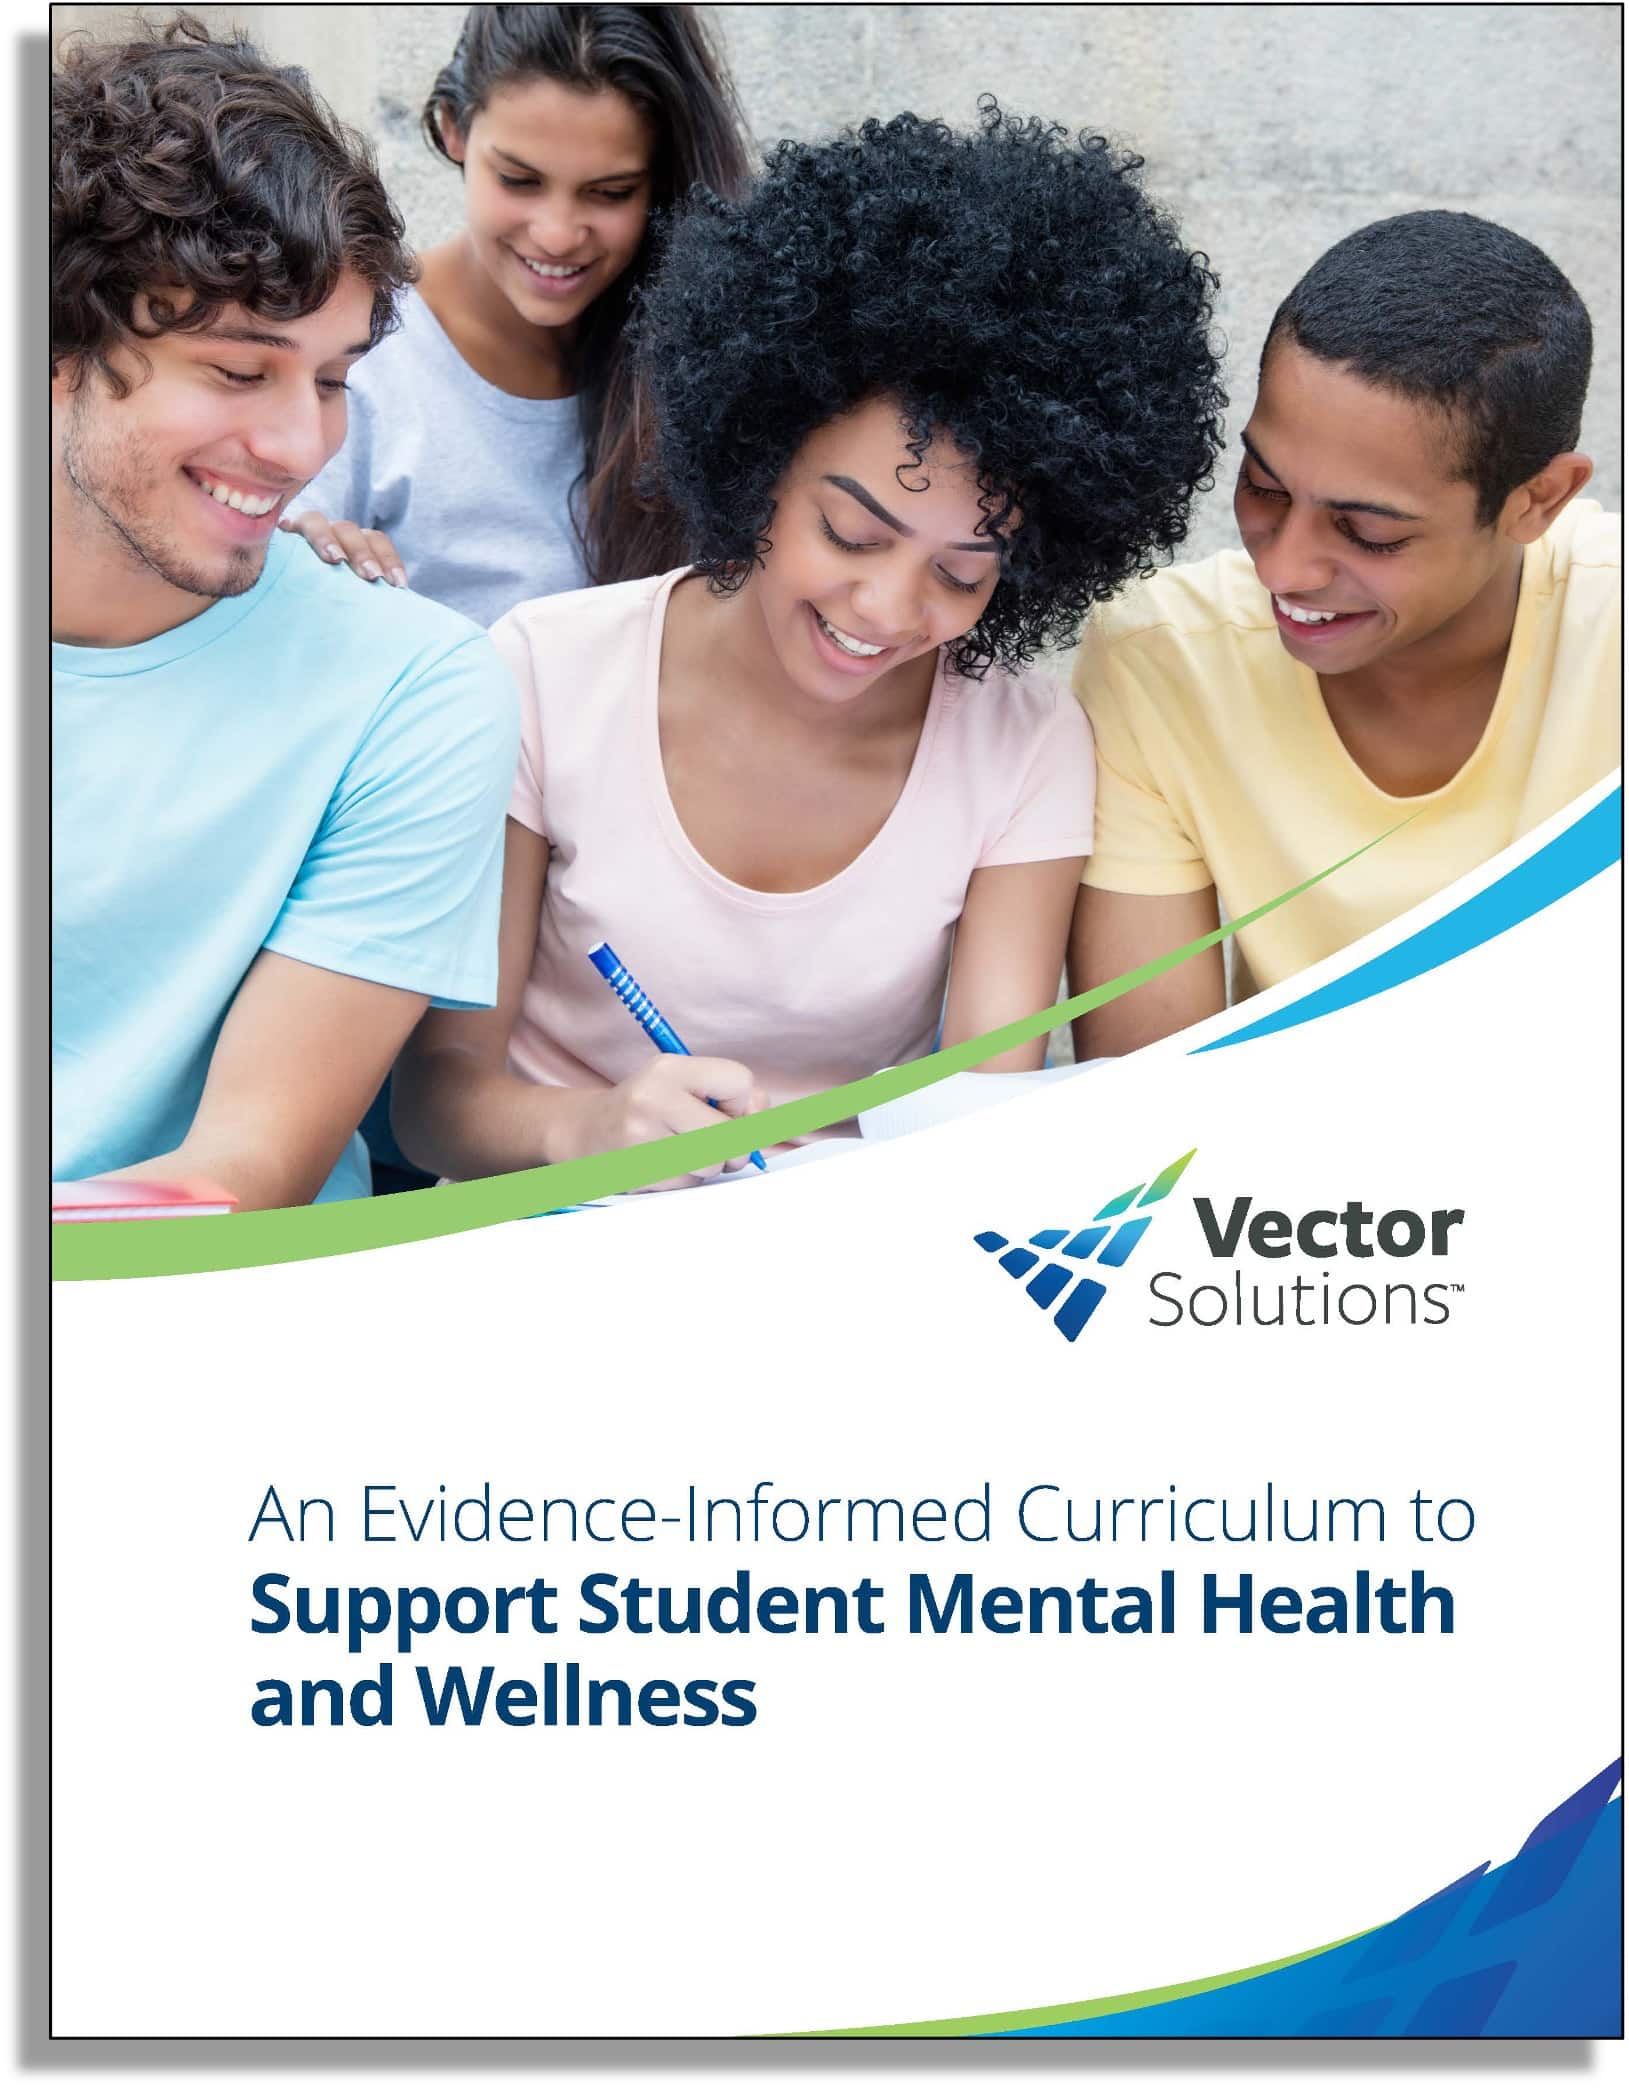 EDU - HE - An Evidence Informed Curriculum to Support Student Mental Health and Wellness